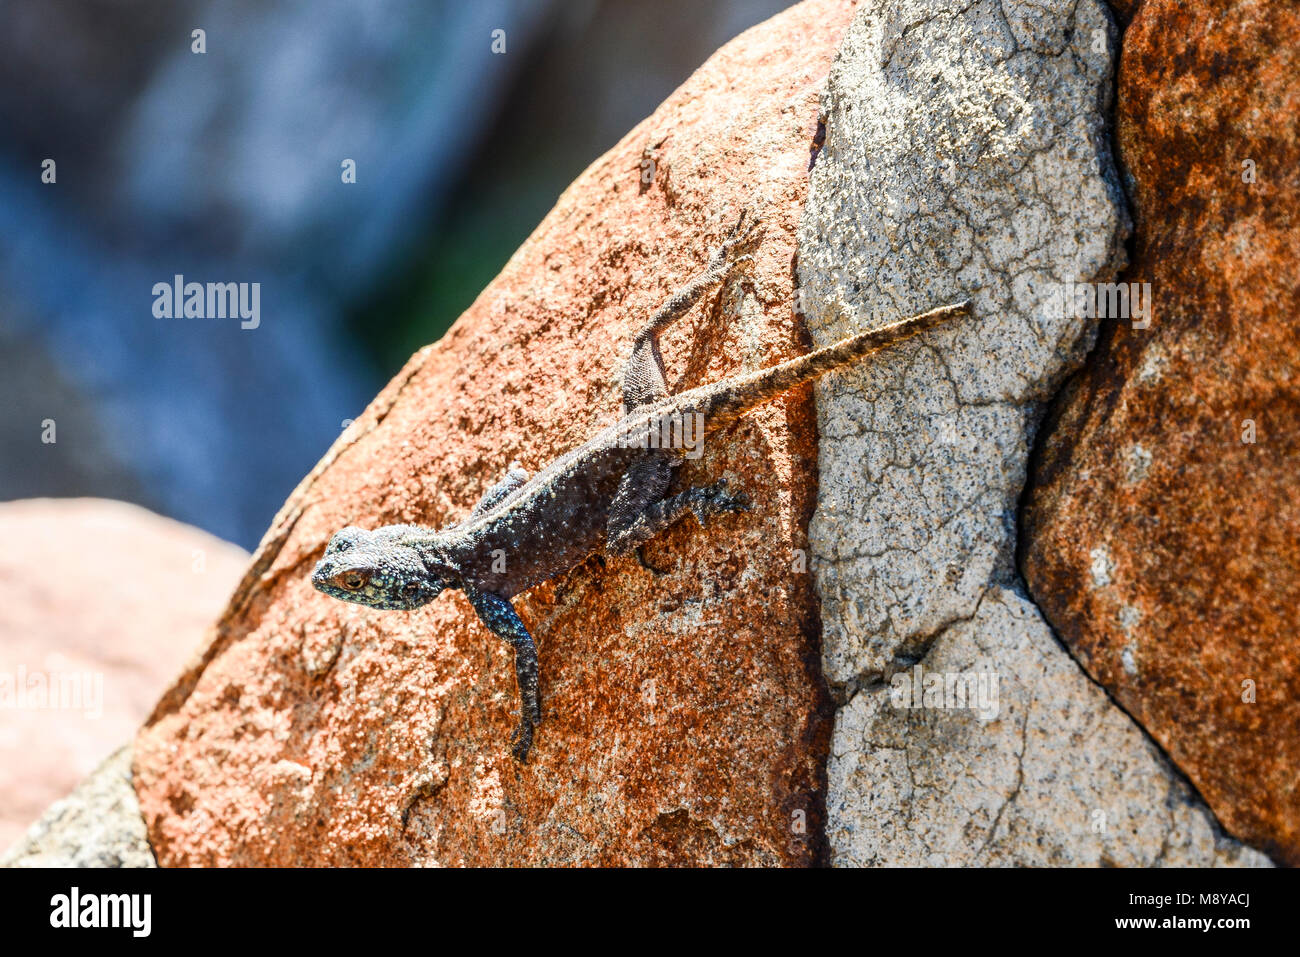 A southern rock agama (Agama atra) on a rock at the Valley Of